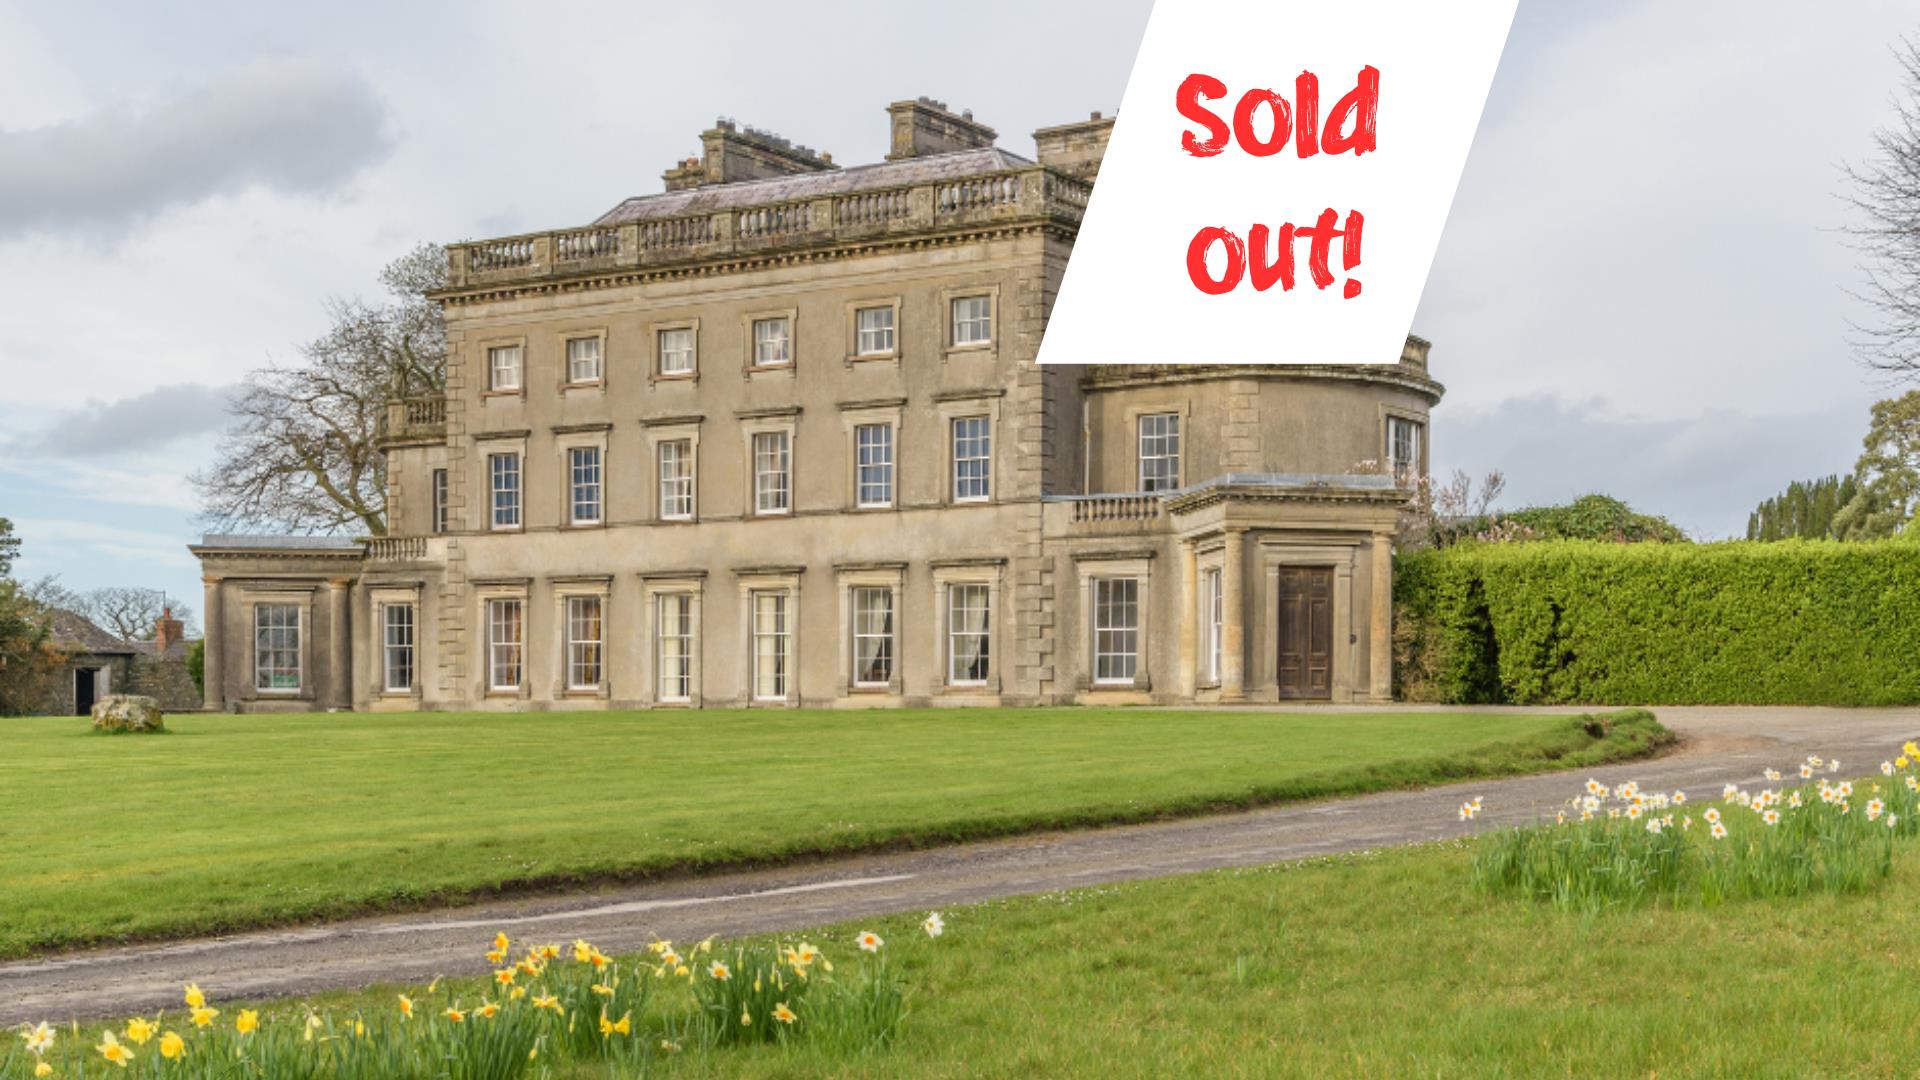 Greyabbey House Rosemount with the text Sold Out